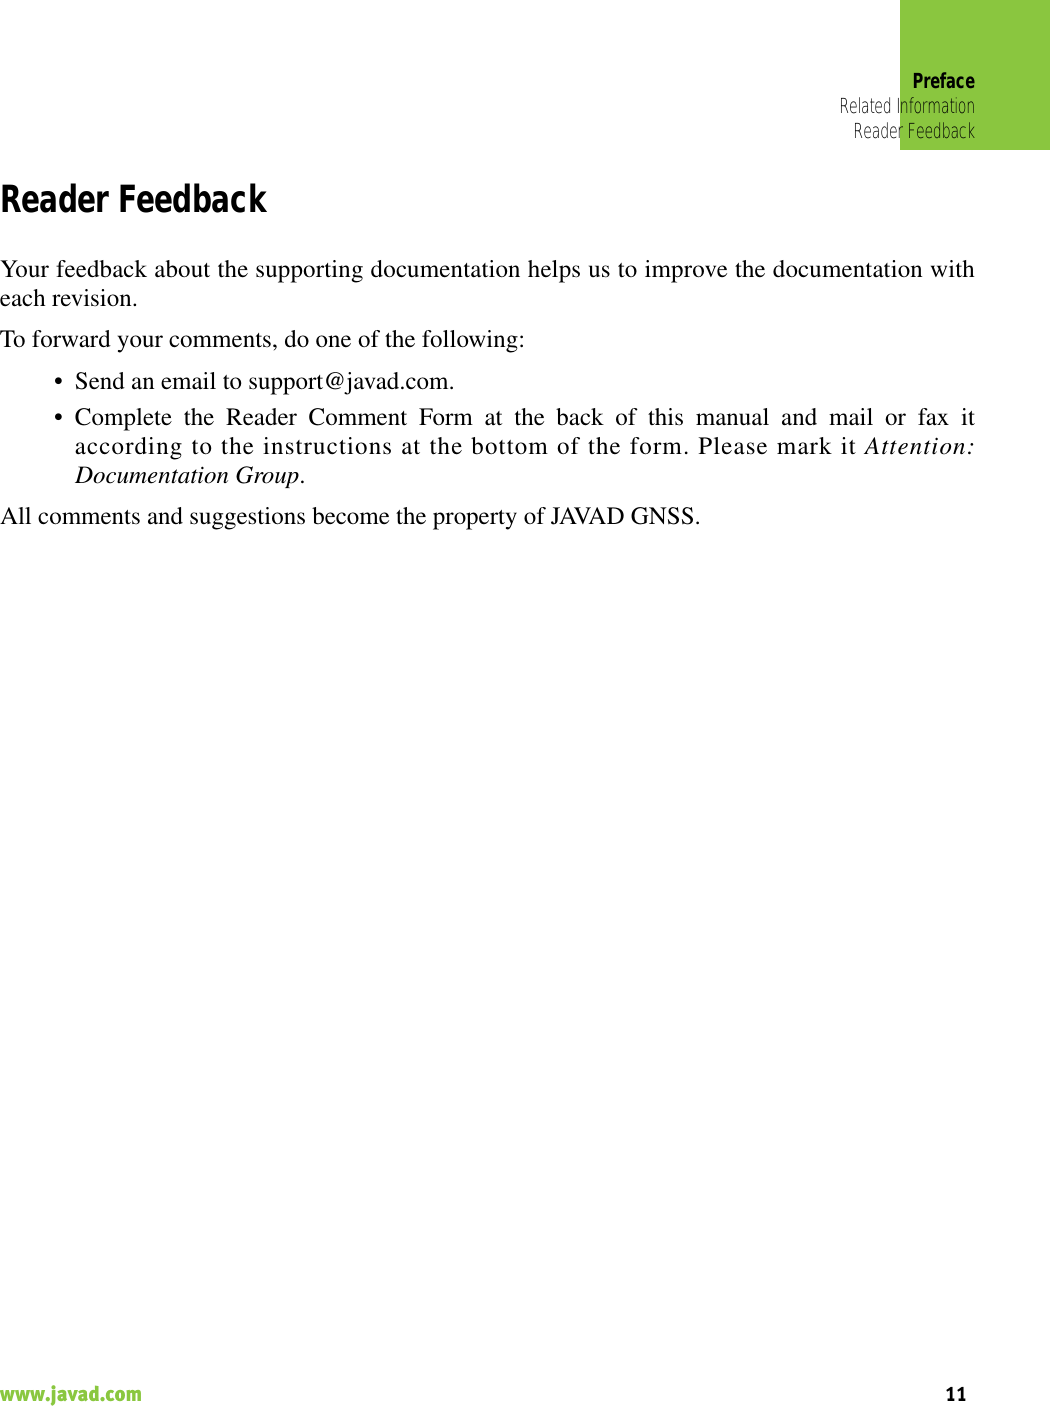 PrefaceRelated InformationReader Feedback11www.javad.com                                                                                                                                                    Reader FeedbackYour feedback about the supporting documentation helps us to improve the documentation witheach revision. To forward your comments, do one of the following:• Send an email to support@javad.com.• Complete the Reader Comment Form at the back of this manual and mail or fax itaccording to the instructions at the bottom of the form. Please mark it Attention:Documentation Group.All comments and suggestions become the property of JAVAD GNSS.